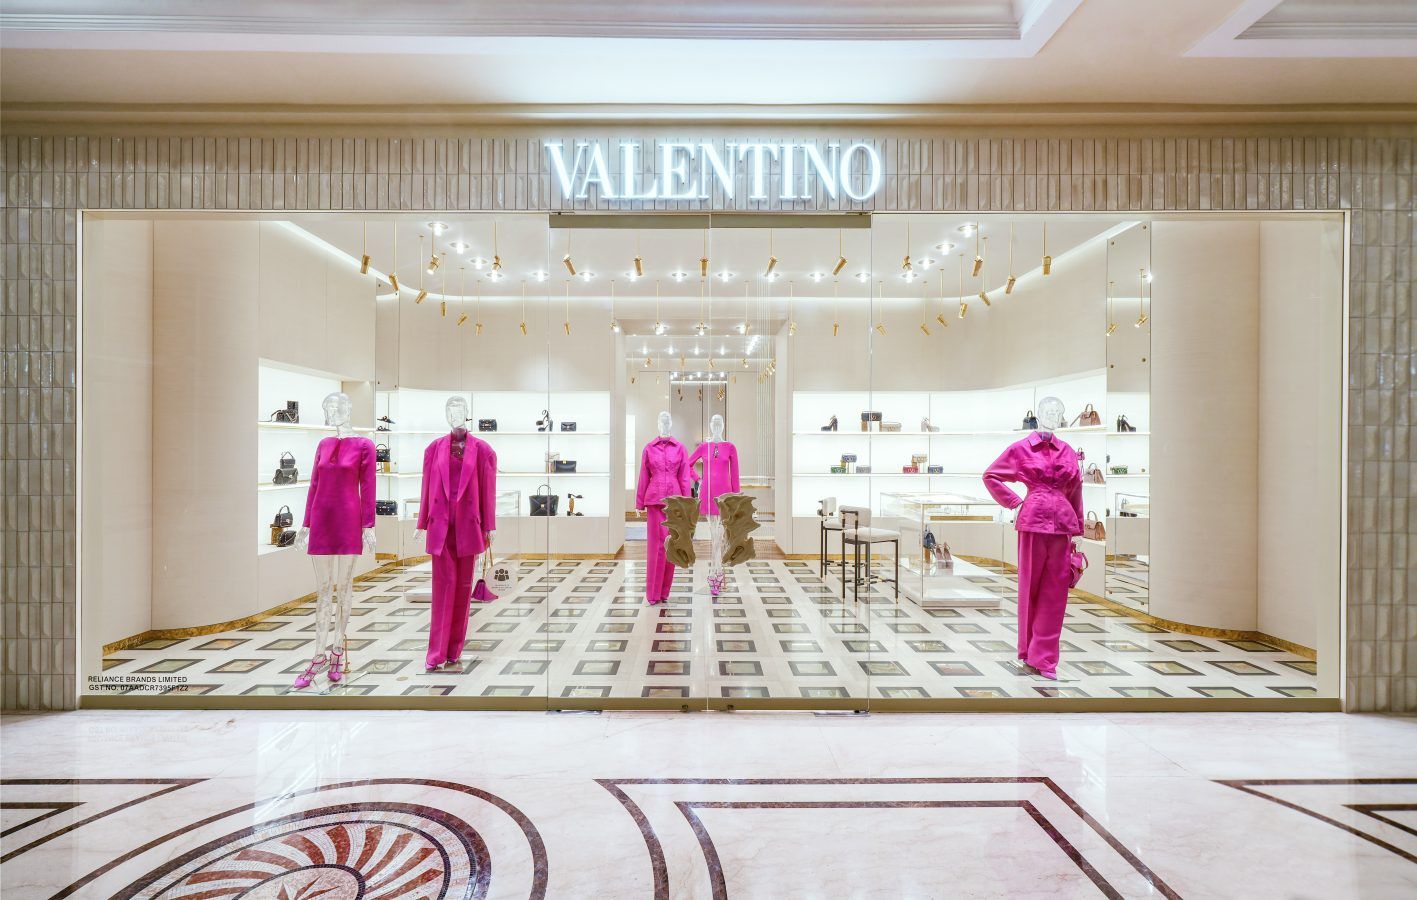 The first Valentino boutique India opens its doors today